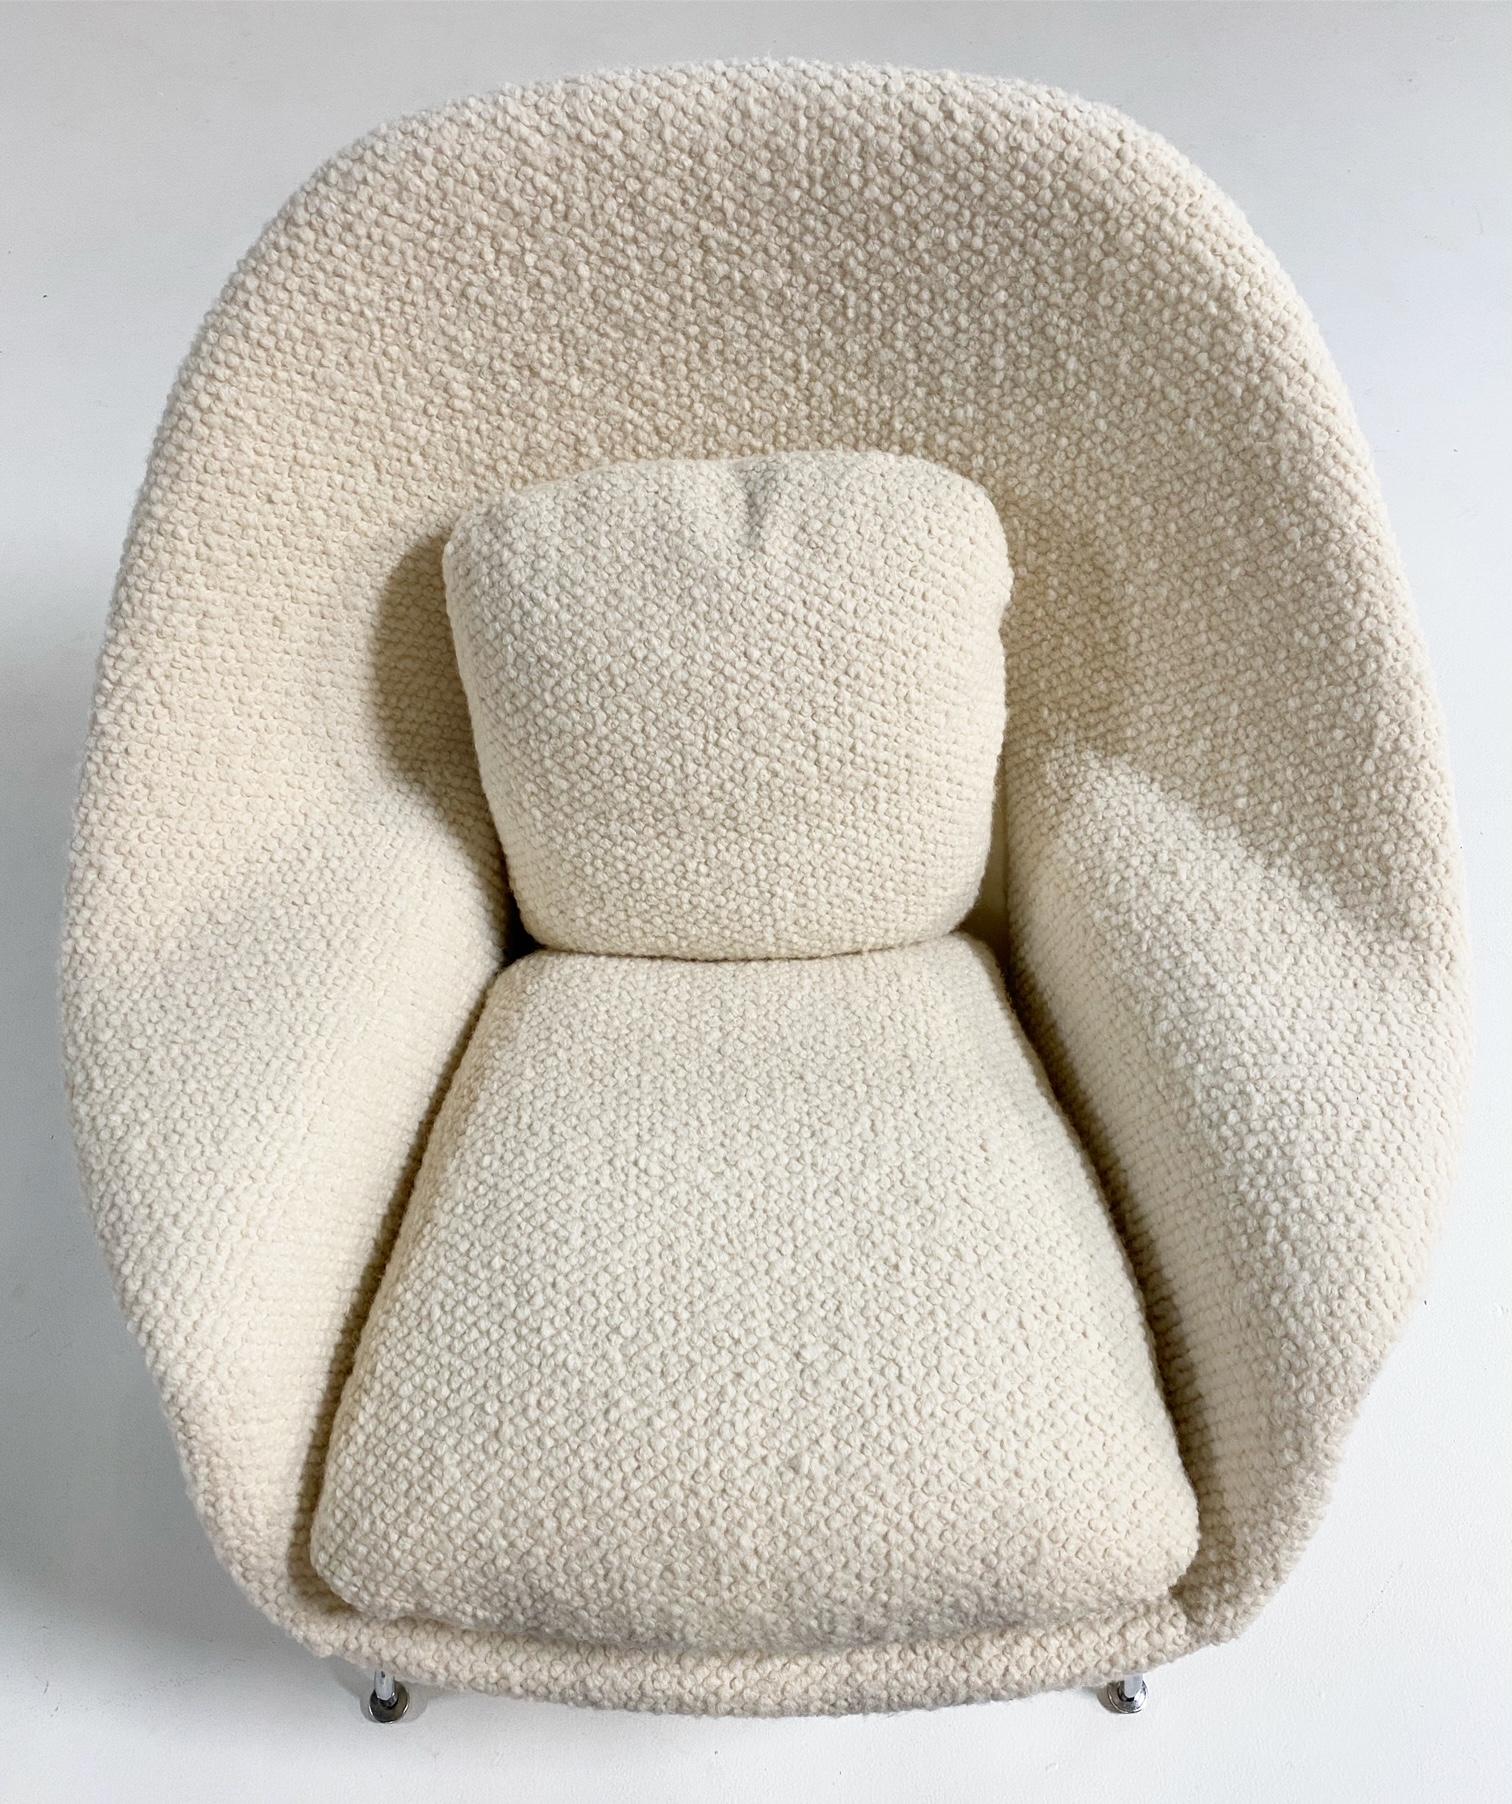 Available now. Ready to ship.

    

“Eero Saarinen designed the groundbreaking Womb chair at Florence Knoll's request for ‘a chair that was like a basket full of pillows - something she could really curl up in.’ This mid-century classic